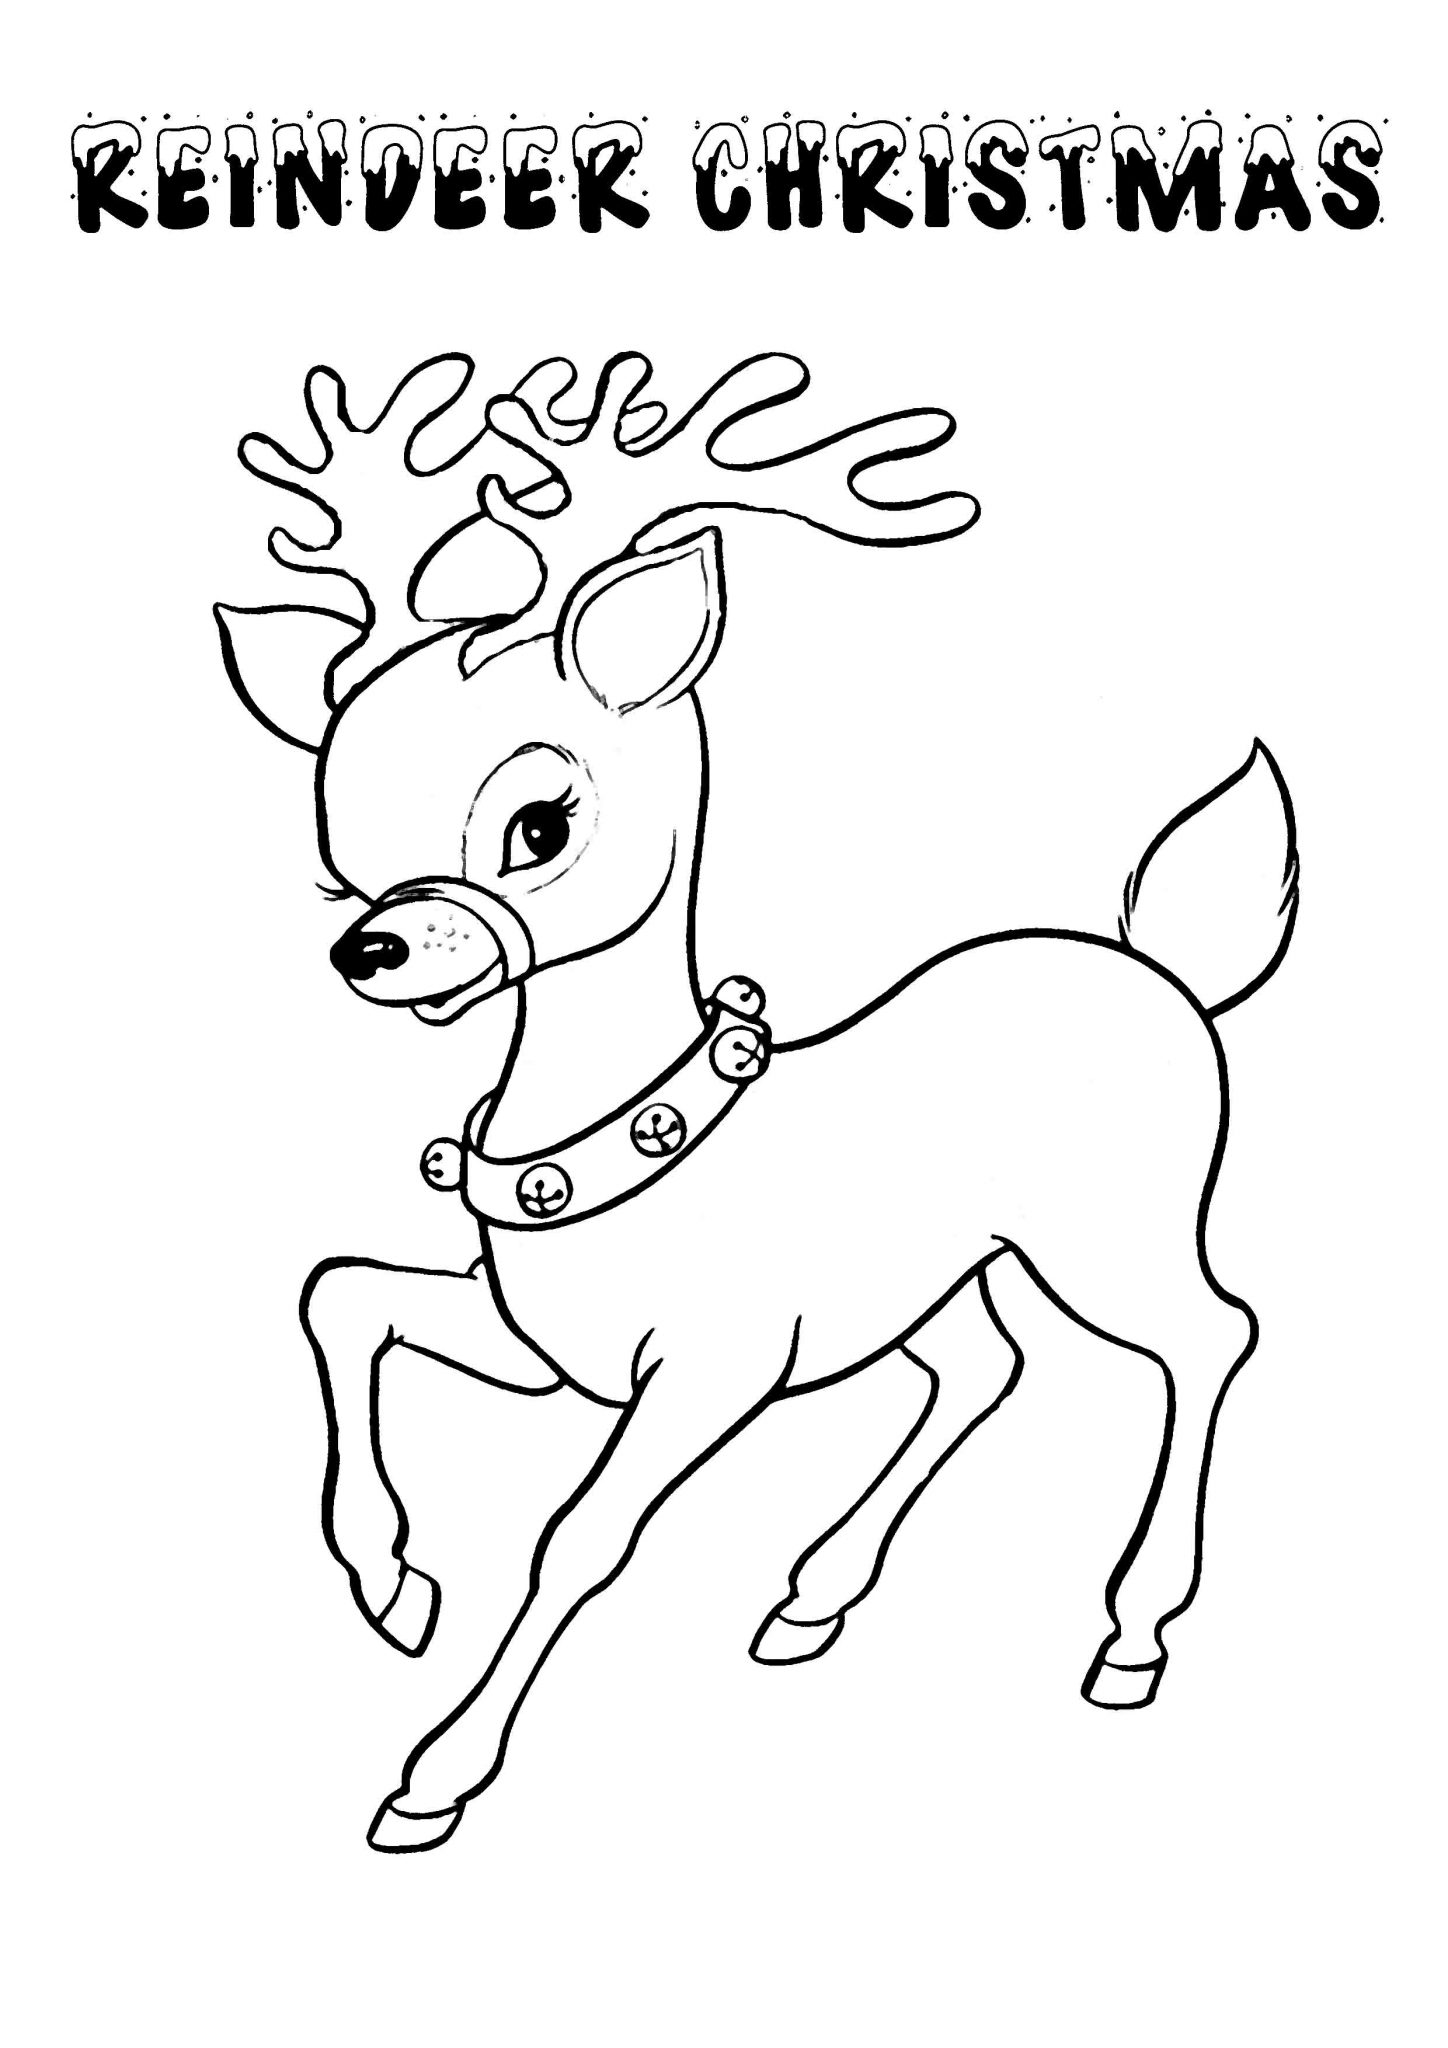 Print & Download - Printable Christmas Coloring Pages for Kids